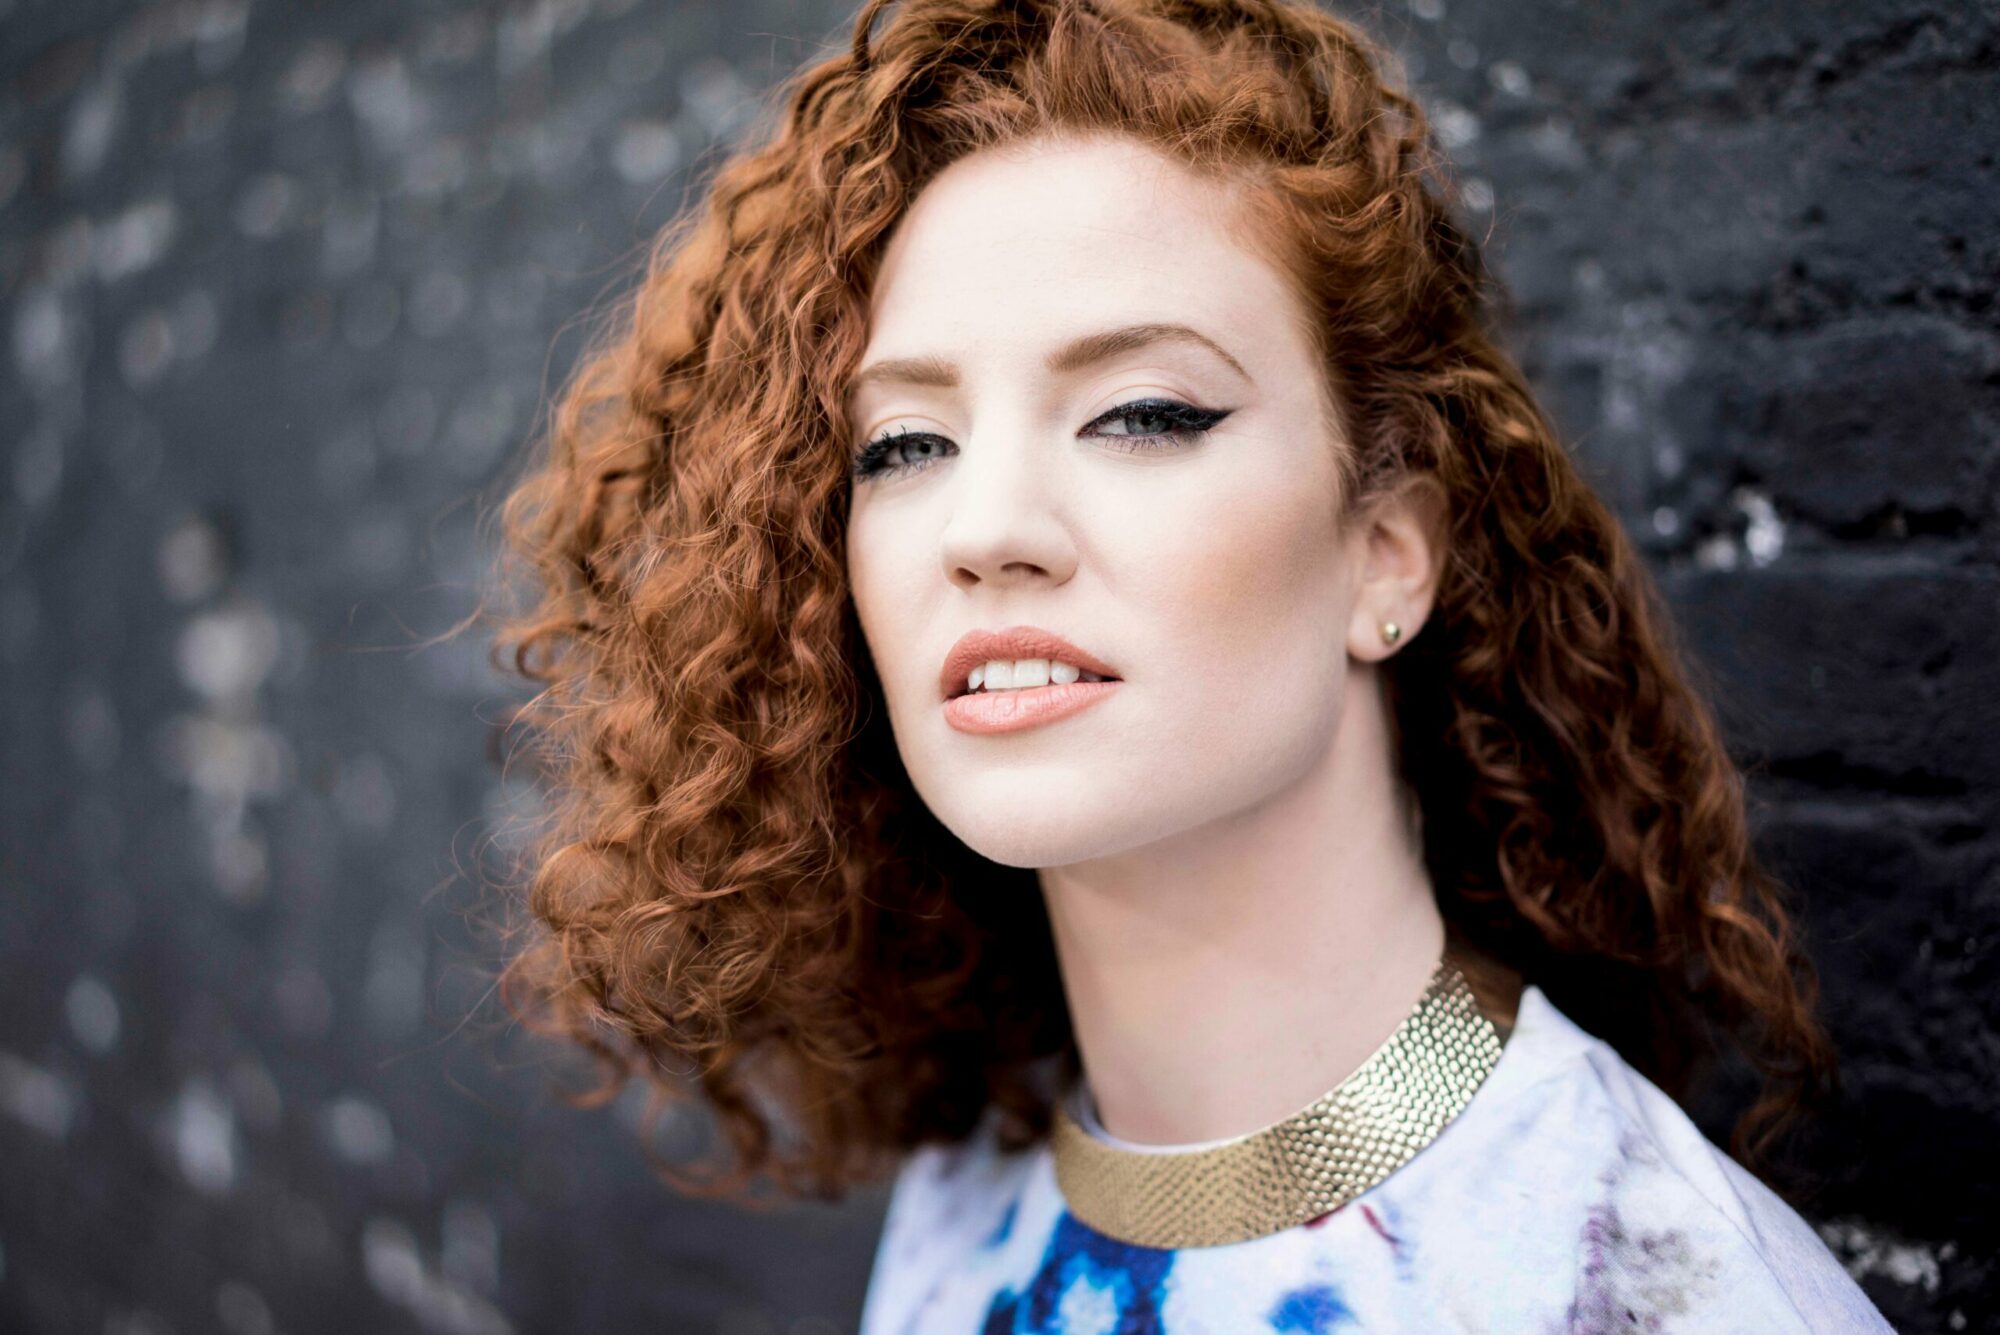 Image name Jess Glynne Official Ticket and Hotel Packages at Scarborough Open Air Theatre Scarborough scaled the 29 image from the post Jess Glynne- Official Ticket and Hotel Packages at Scarborough Open Air Theatre, Scarborough in Yorkshire.com.